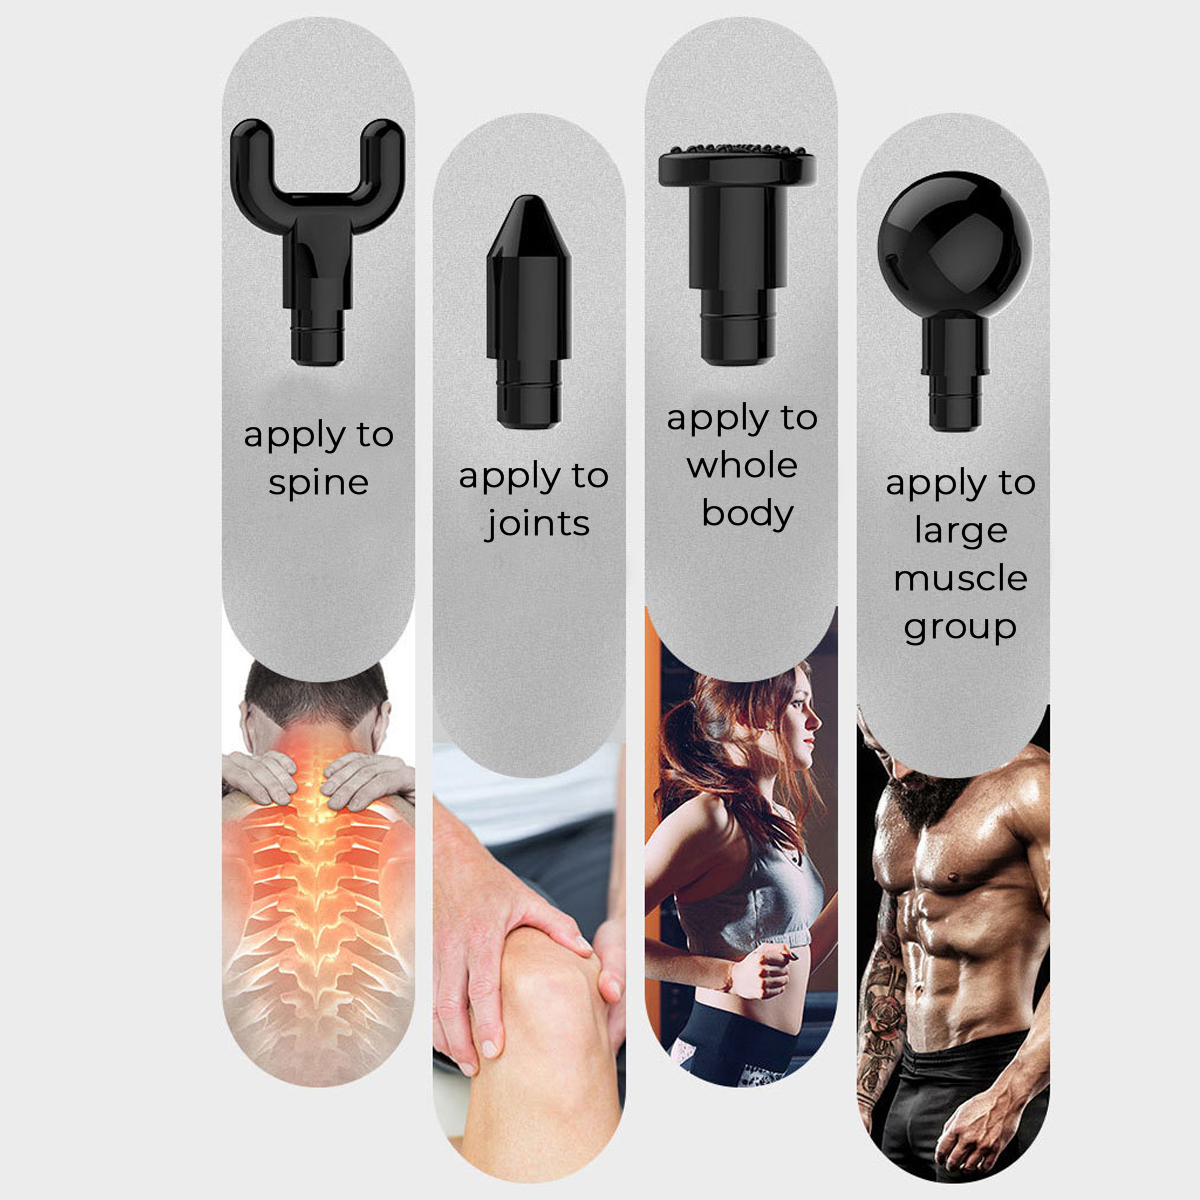 2400mAh-Electric-Percussion-Massager-3-Speeds-Low-Noise-Vibration-Muscle-Therapy-Device-with-6-Massa-1550390-7